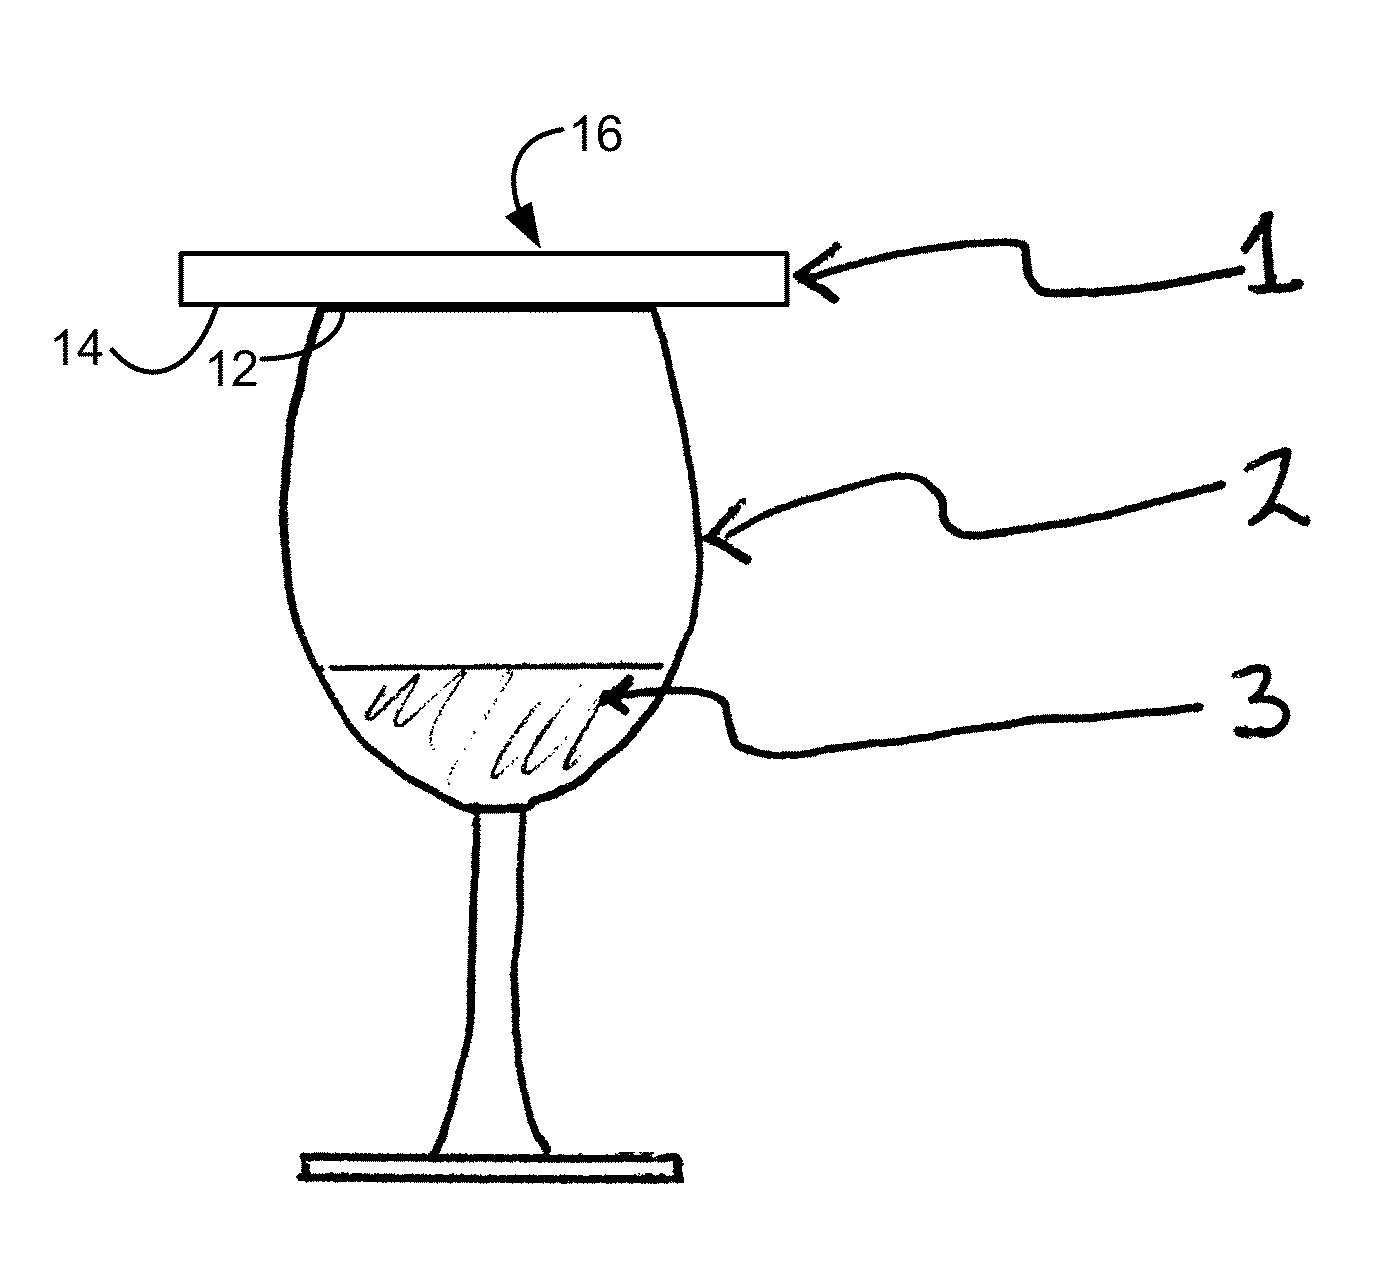 Apparatus for containment and concentration of volatile esters